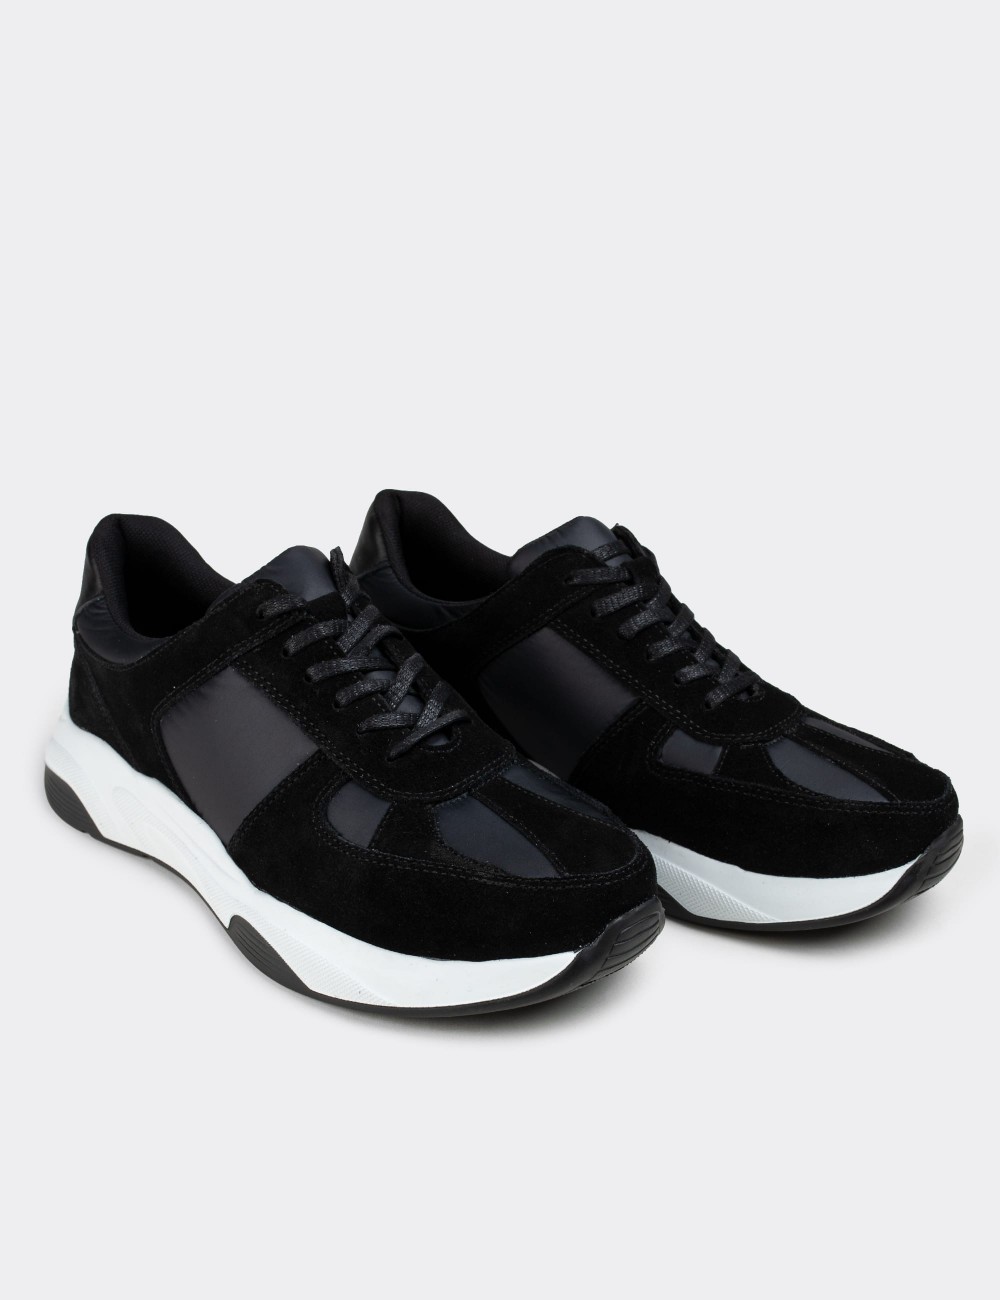 Black Suede Leather Sneakers - 01821MSYHE01